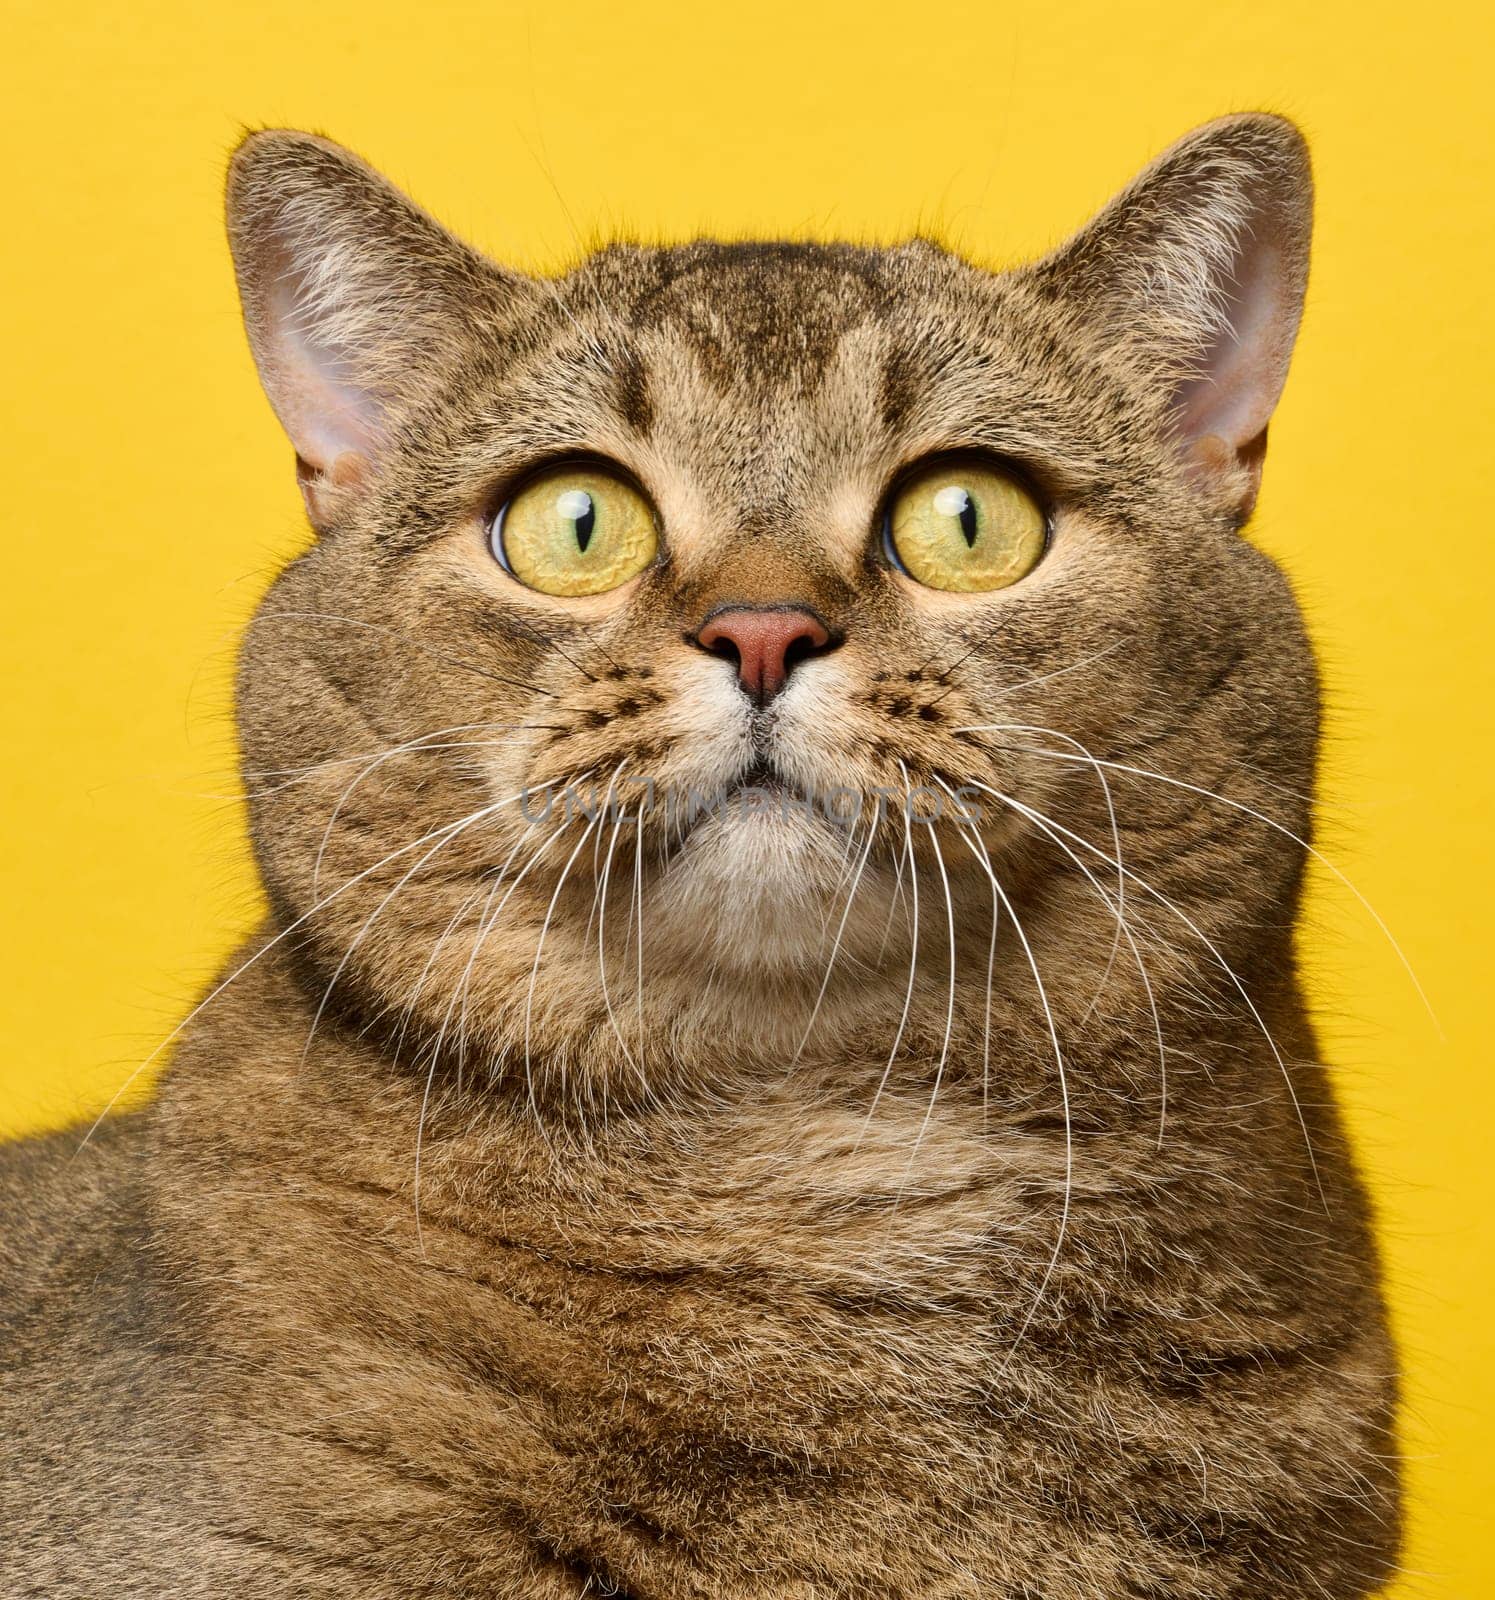 A cute adult straight-eared Scottish breed gray cat on a yellow background, portrait